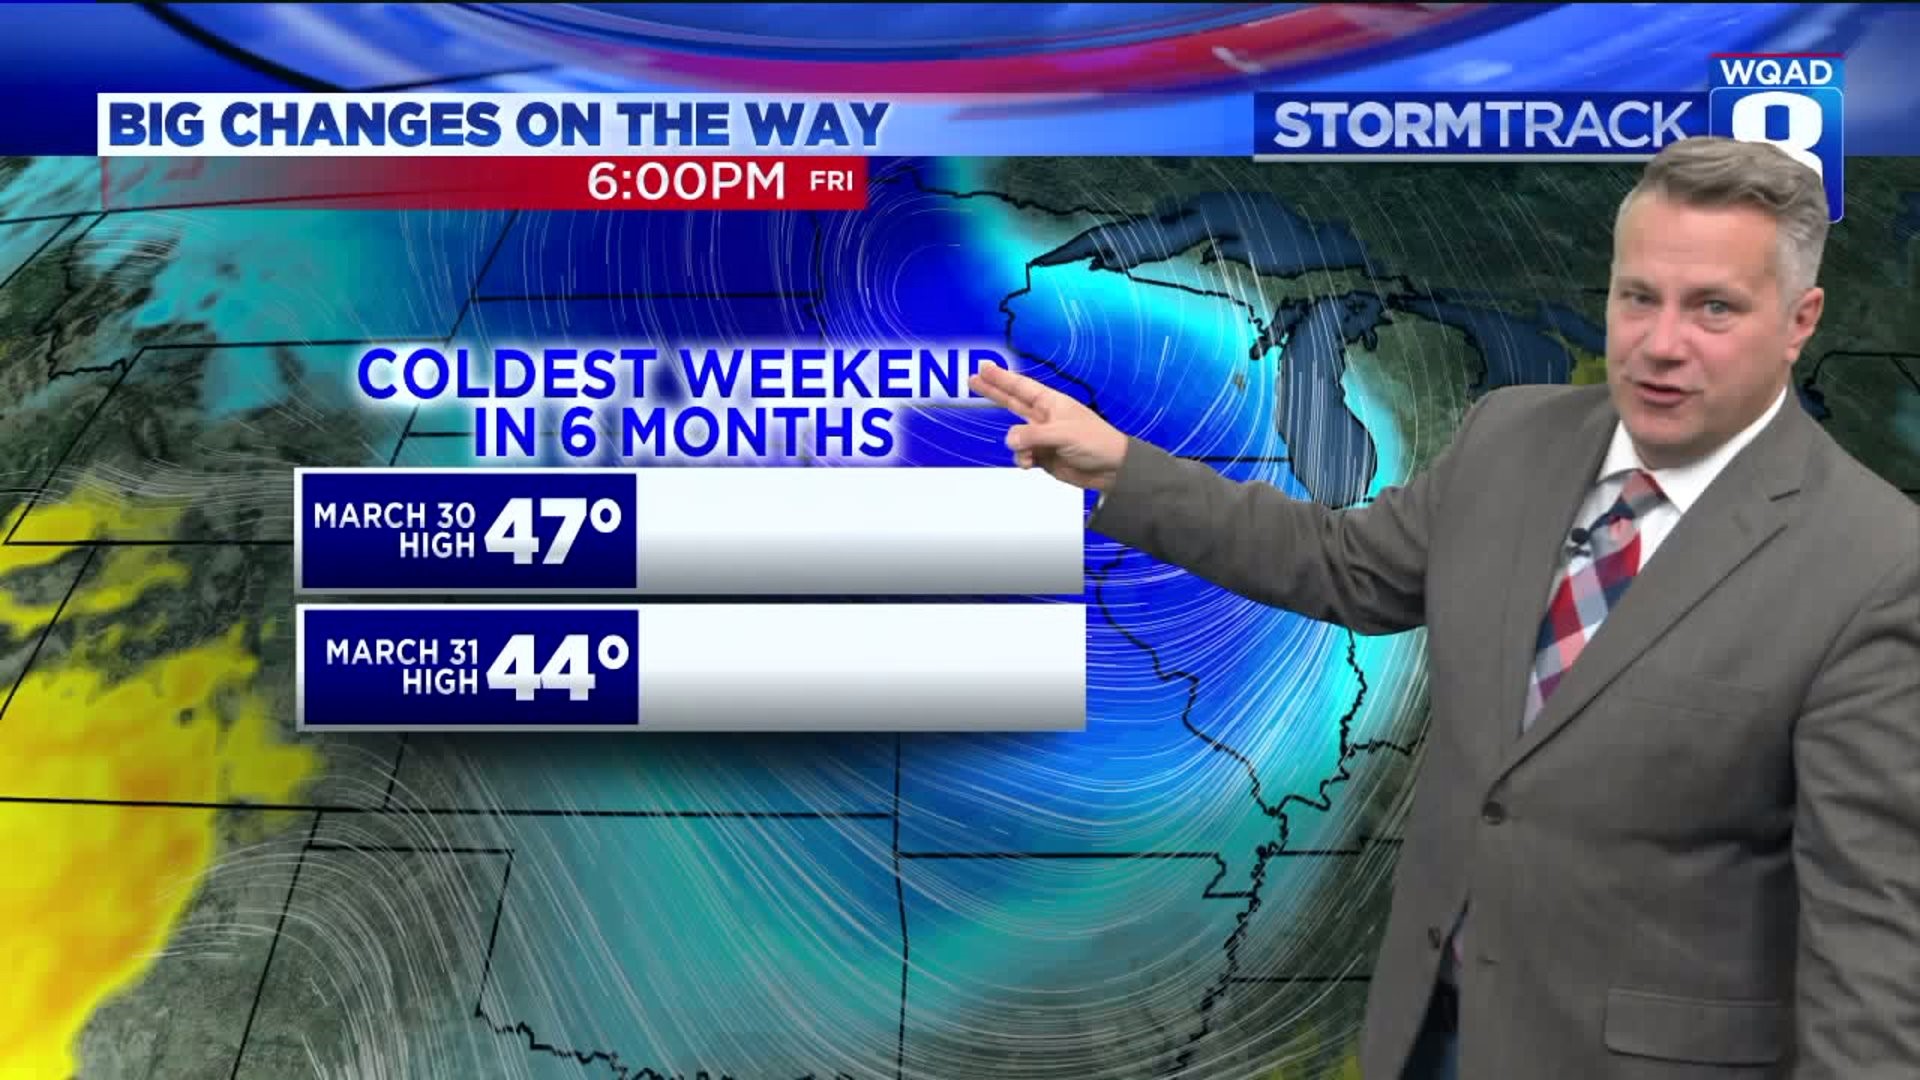 Eric is tracking the coldest weekend weather since March!